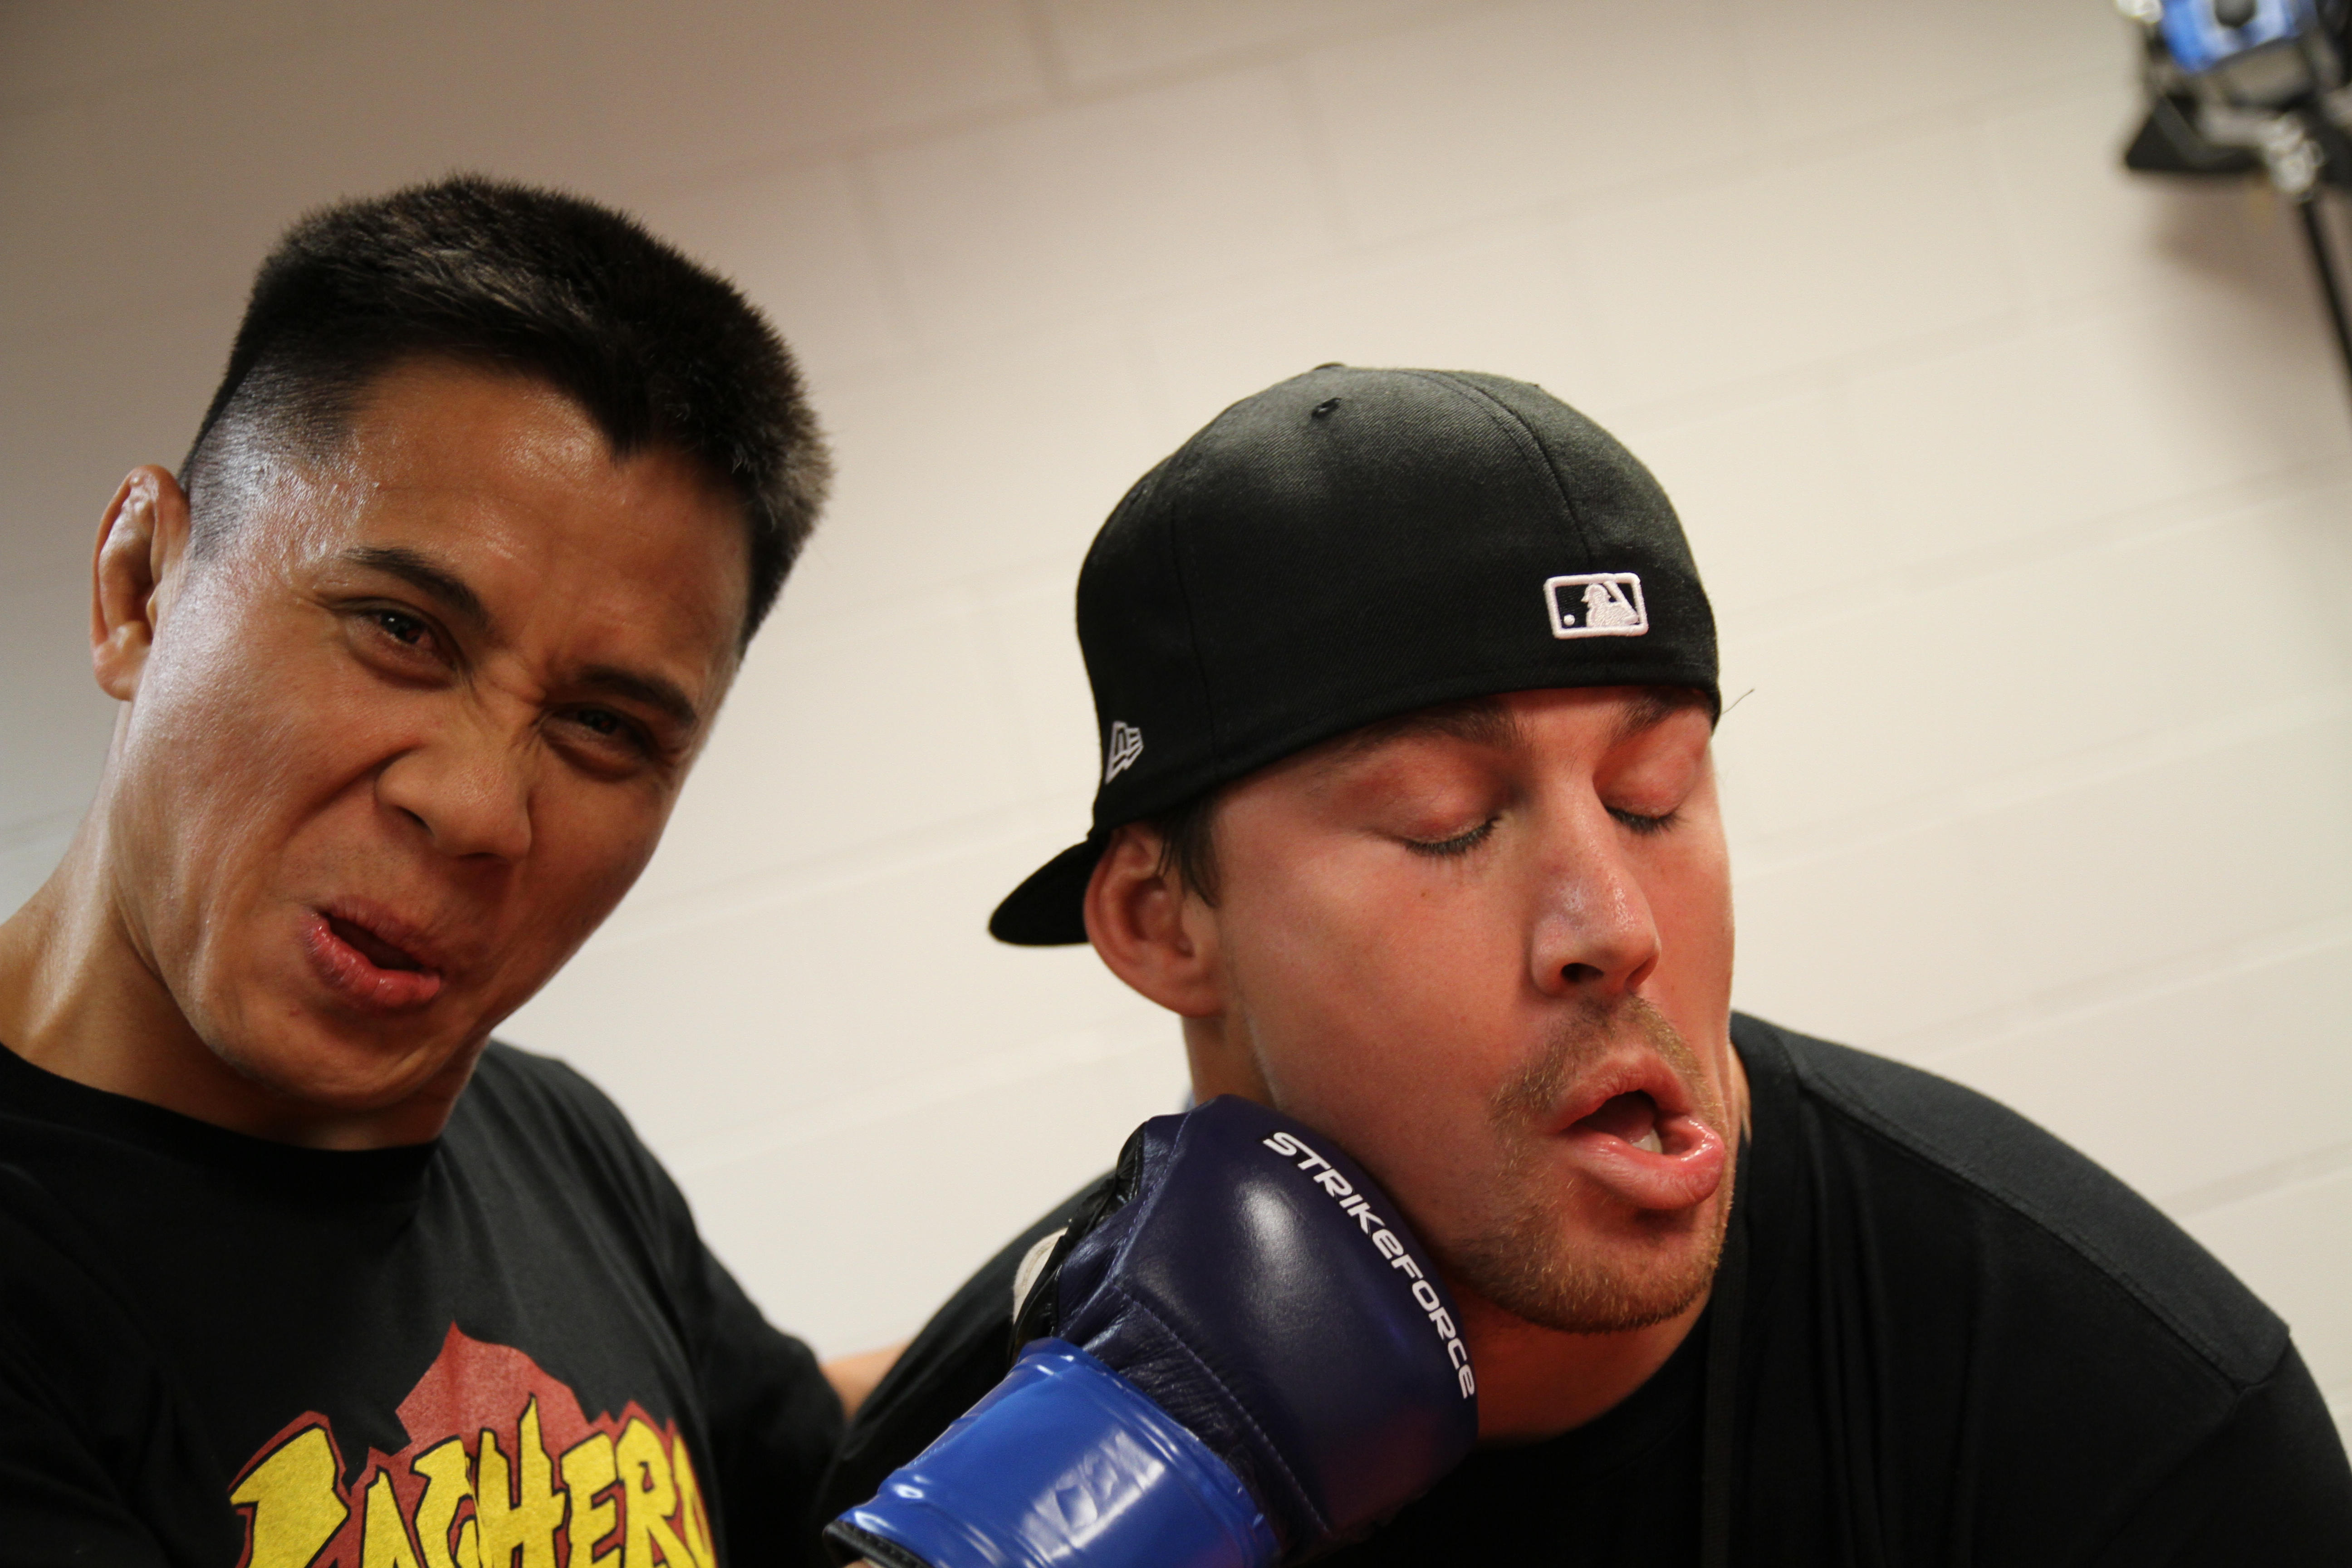 Cung Le and Channing back stage before Cung's big fight.